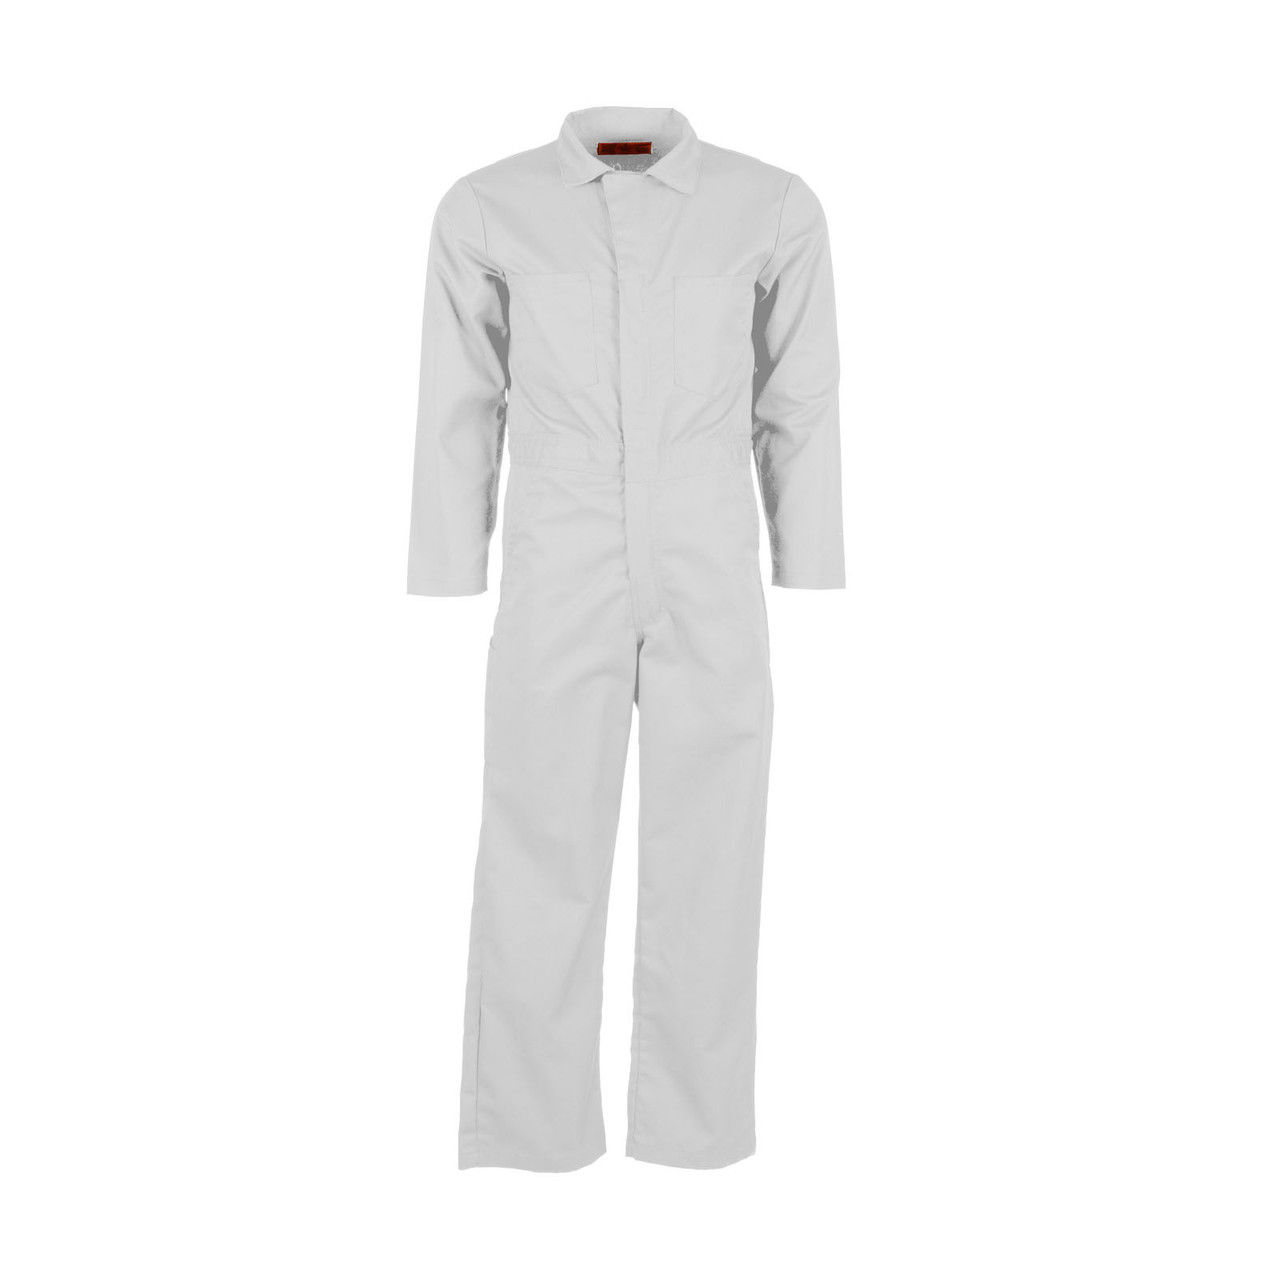 Does this coverall have back pockets?